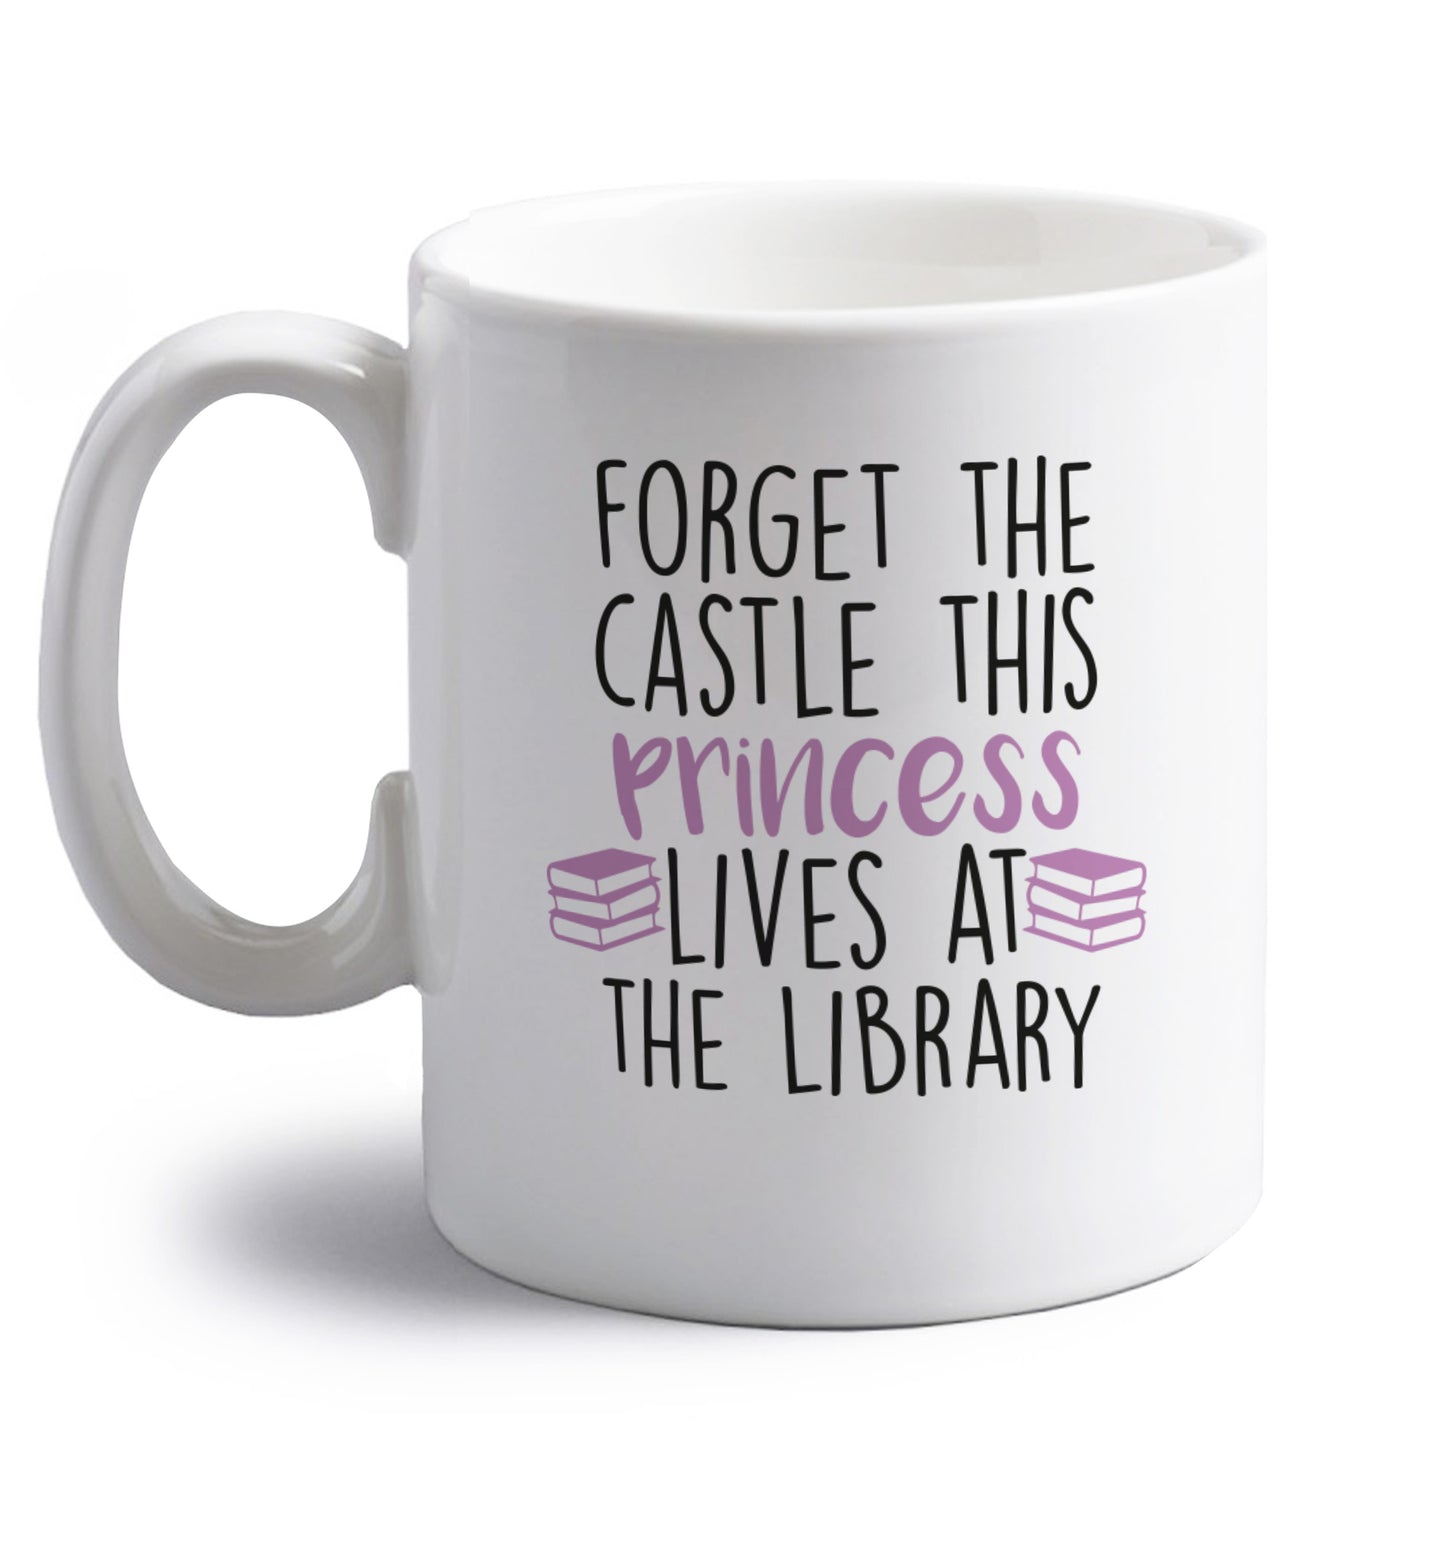 Forget the castle this princess lives at the library right handed white ceramic mug 